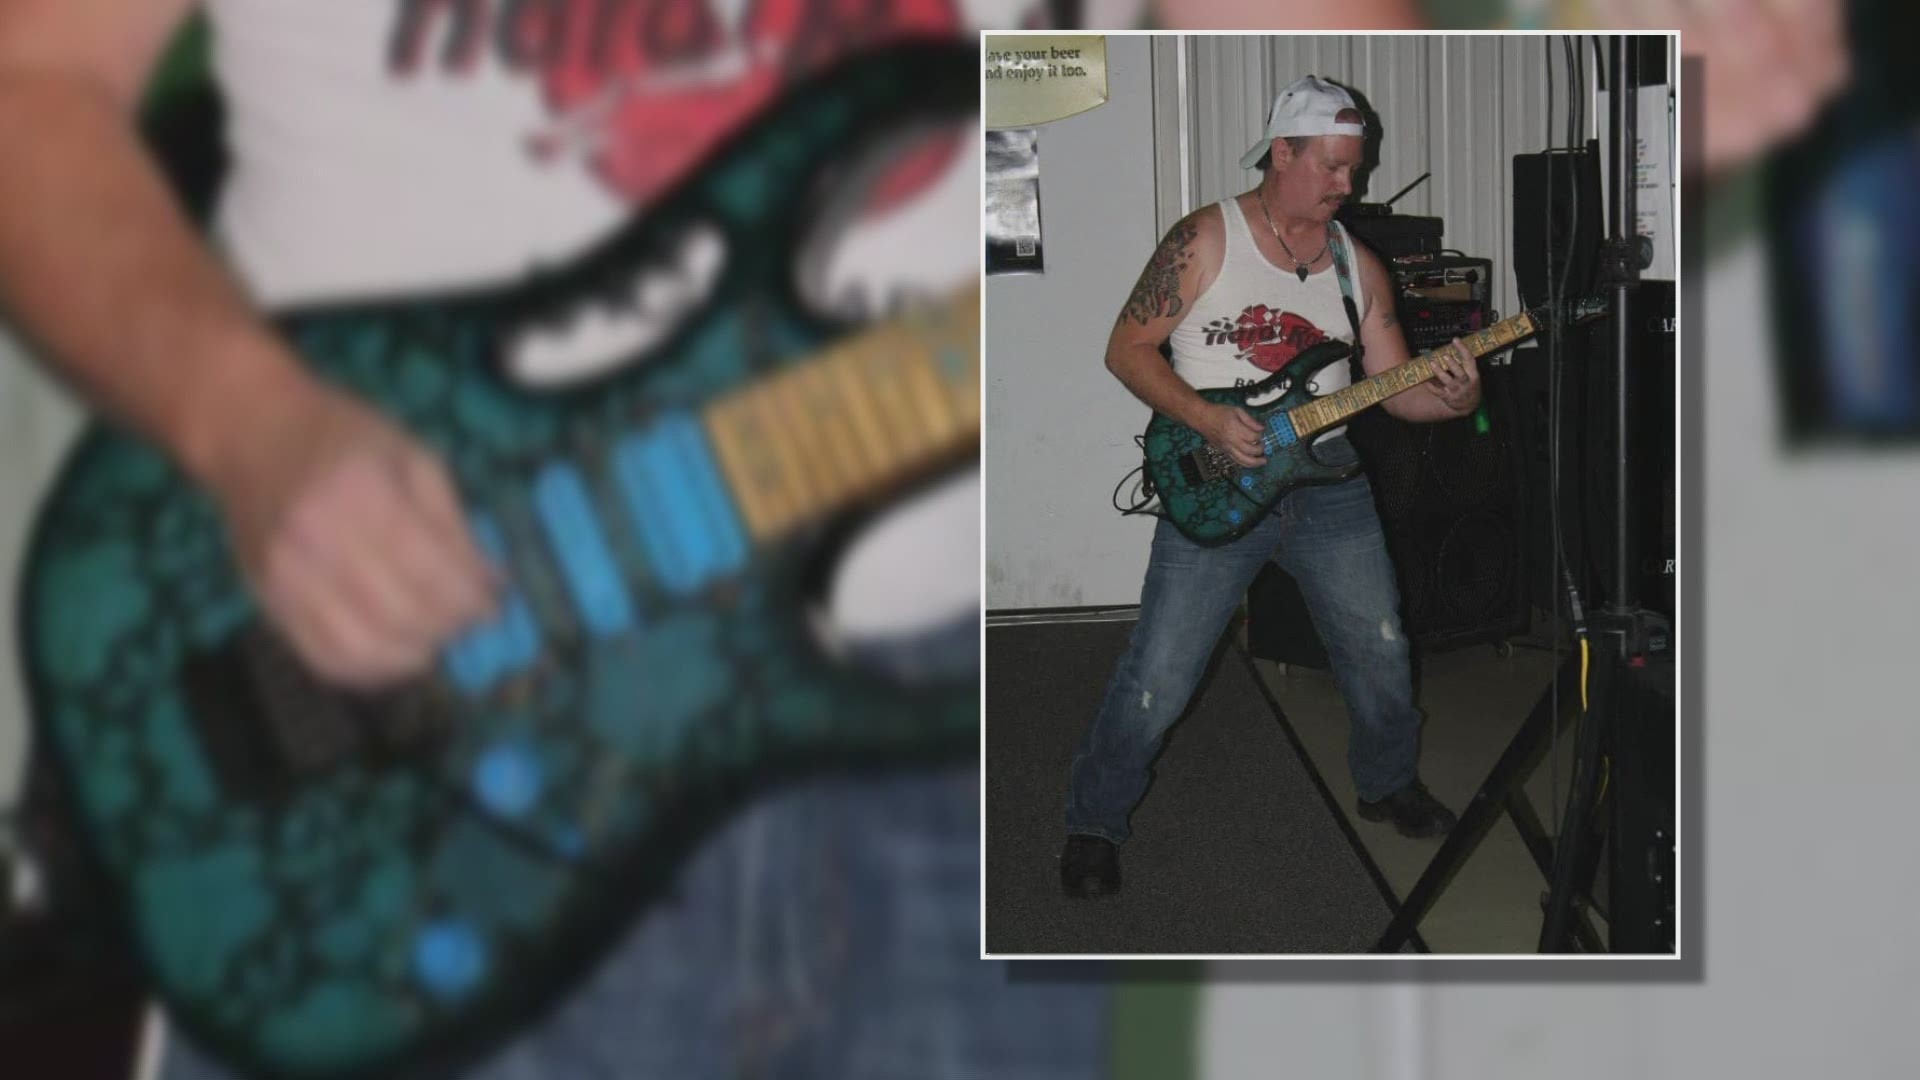 Scott Fell traded in his favorite guitar in 2013. He regretted the decision until his death in early 2021. To honor his father, Zakk Fell is on a mission to find it.